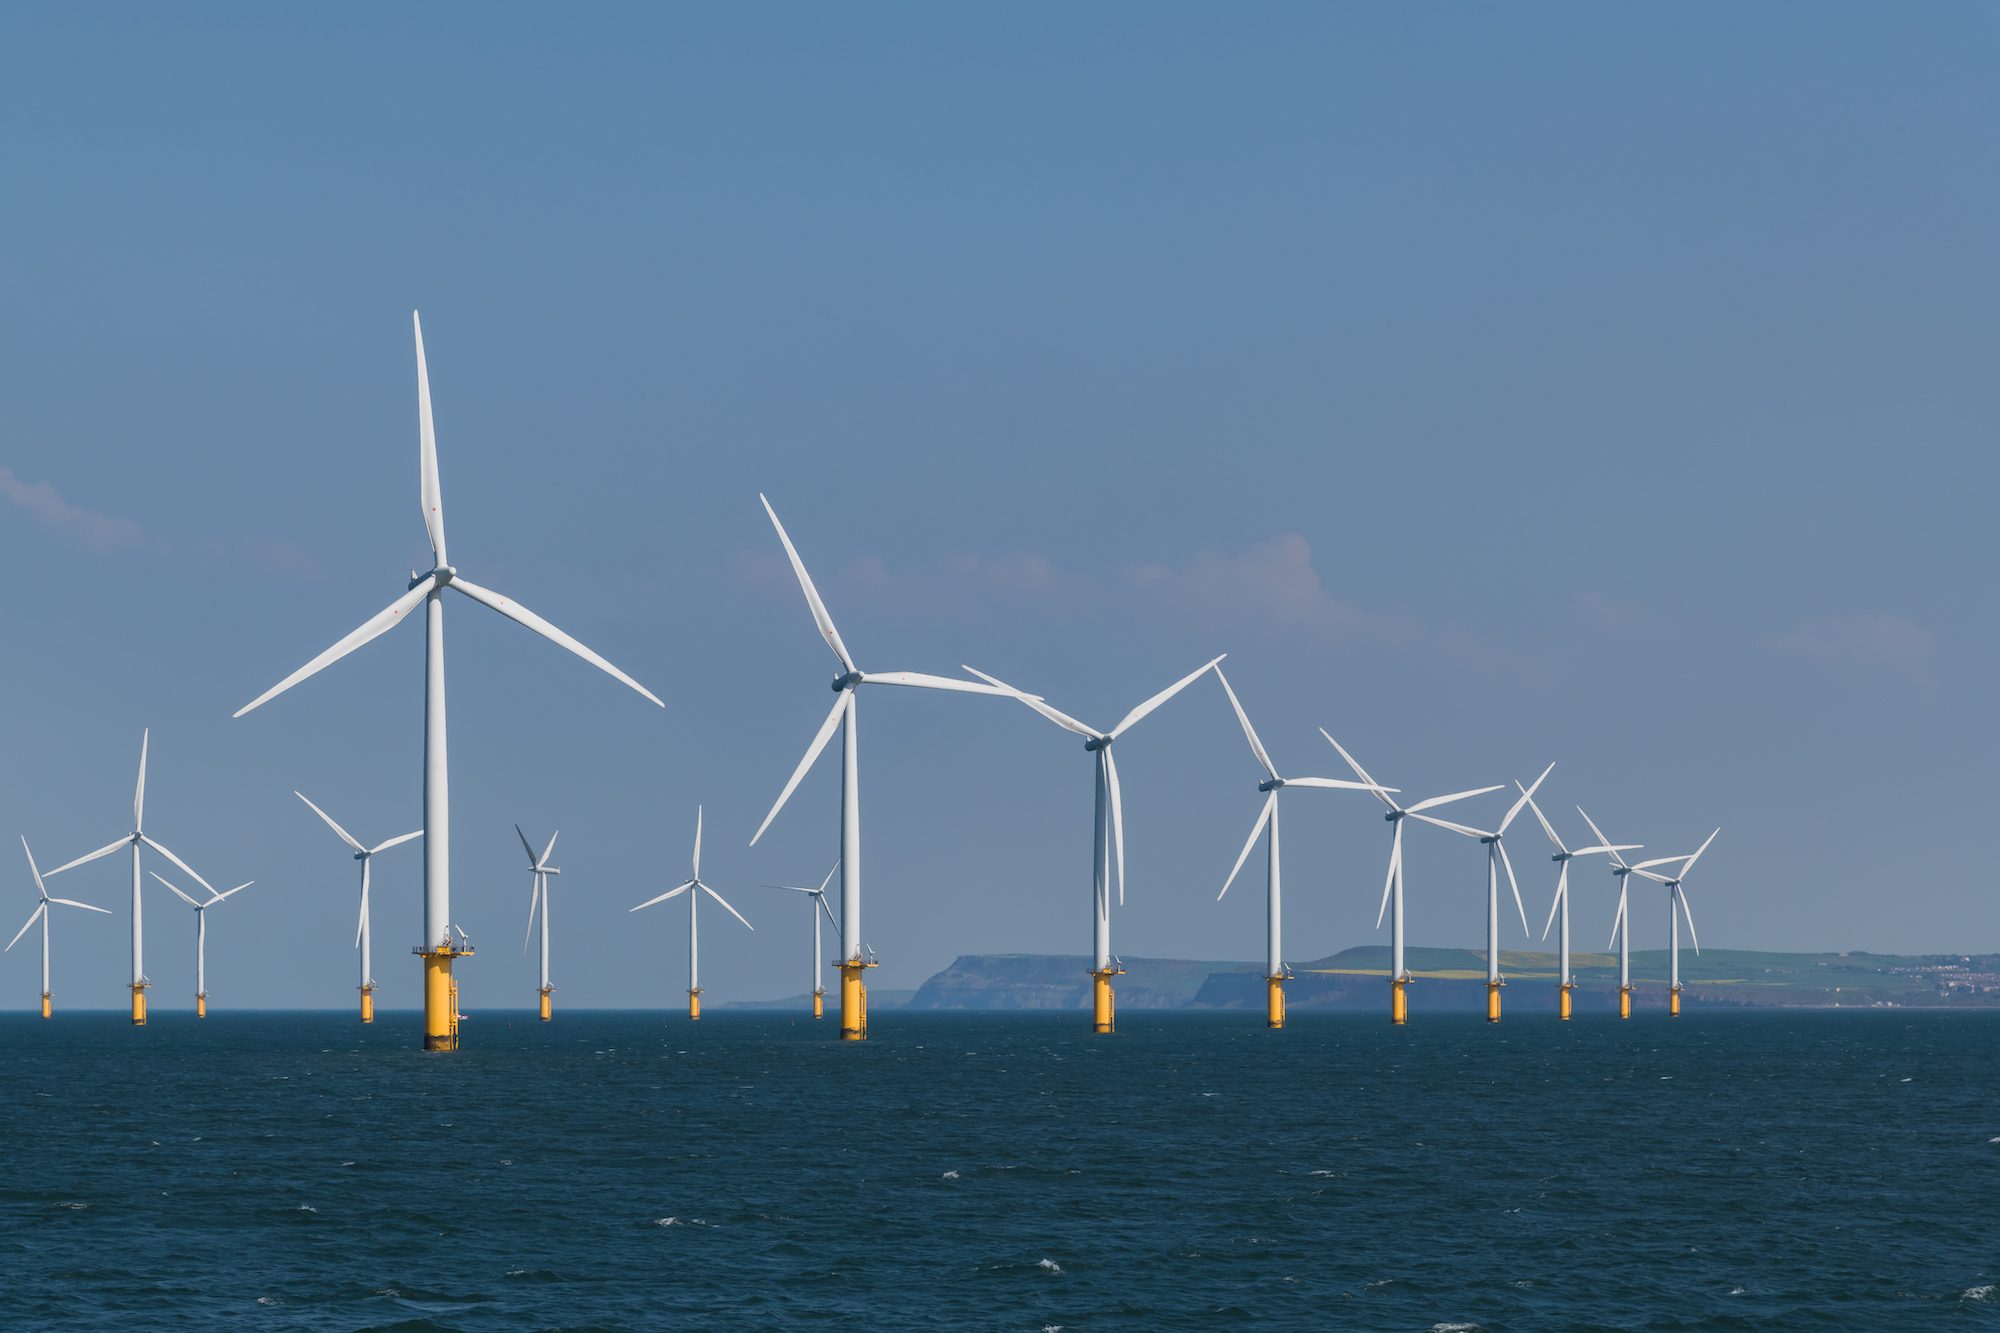 New York Bight Offshore Wind Auction Blows Away Record with $4.37 Billion in Winning Bids